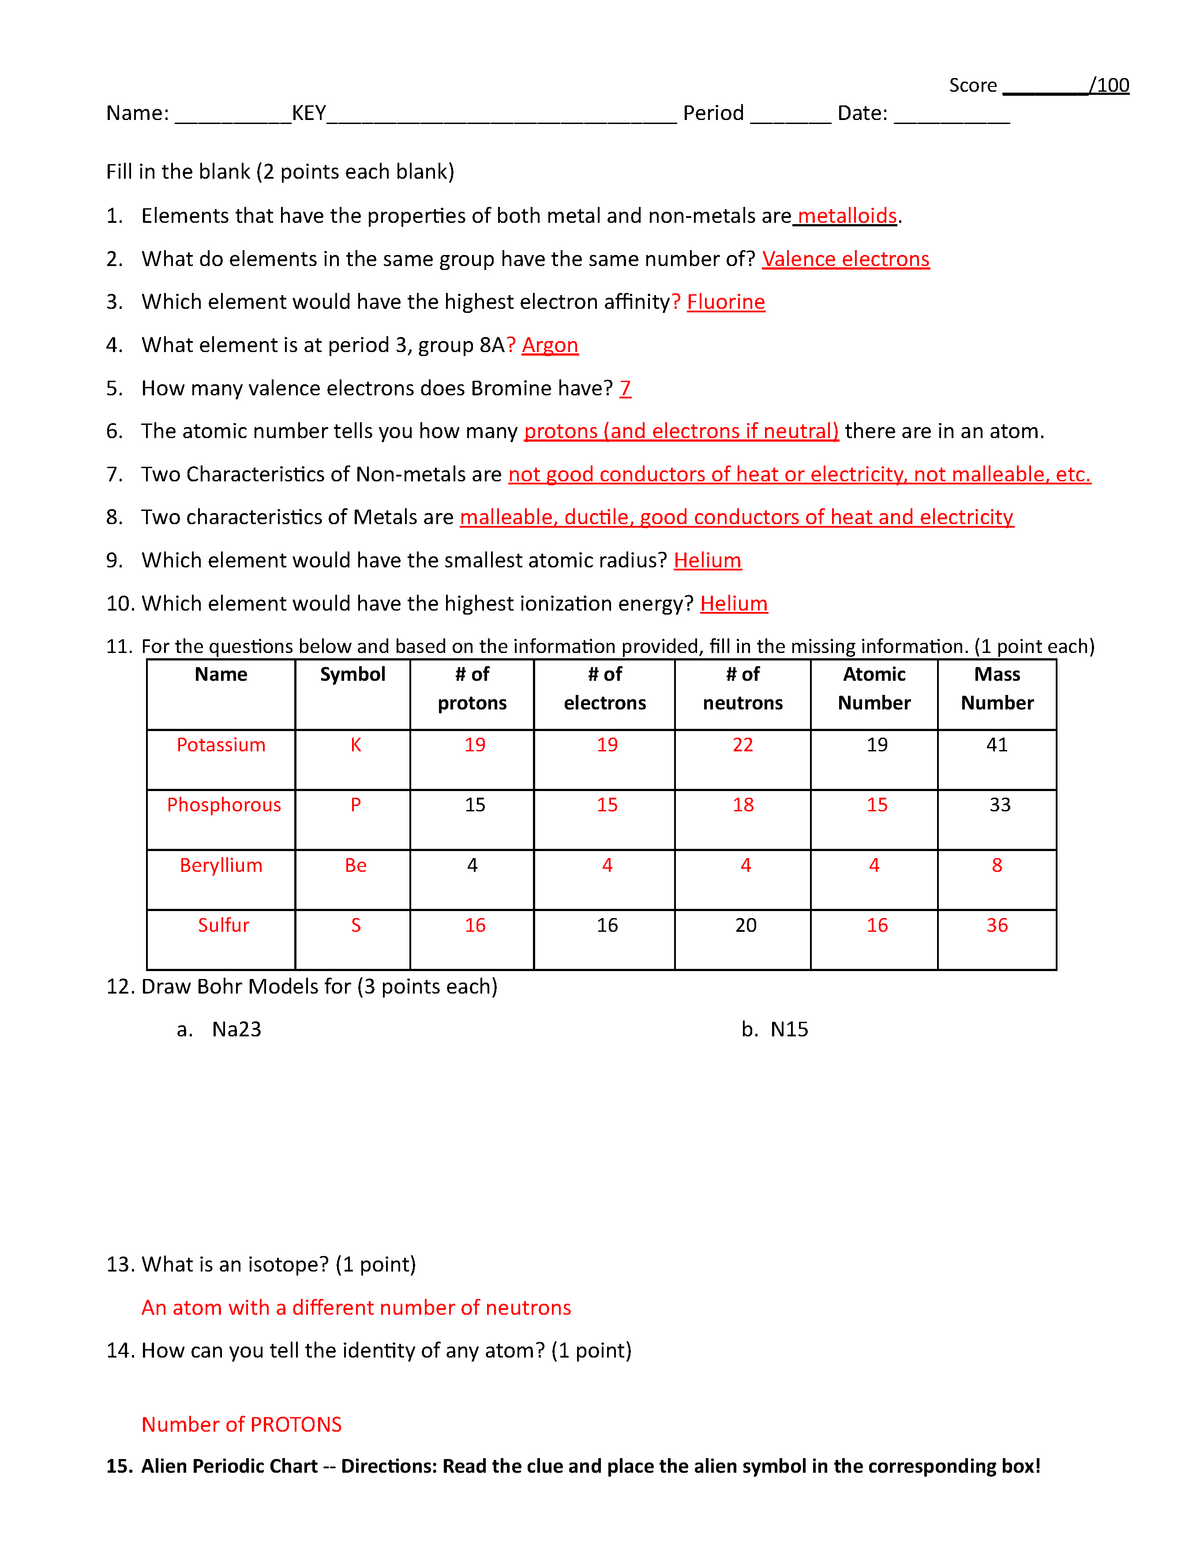 KEY periodic table test 21 - CHEM 021 - Chemistry - StuDocu Inside Periodic Trends Practice Worksheet Answers